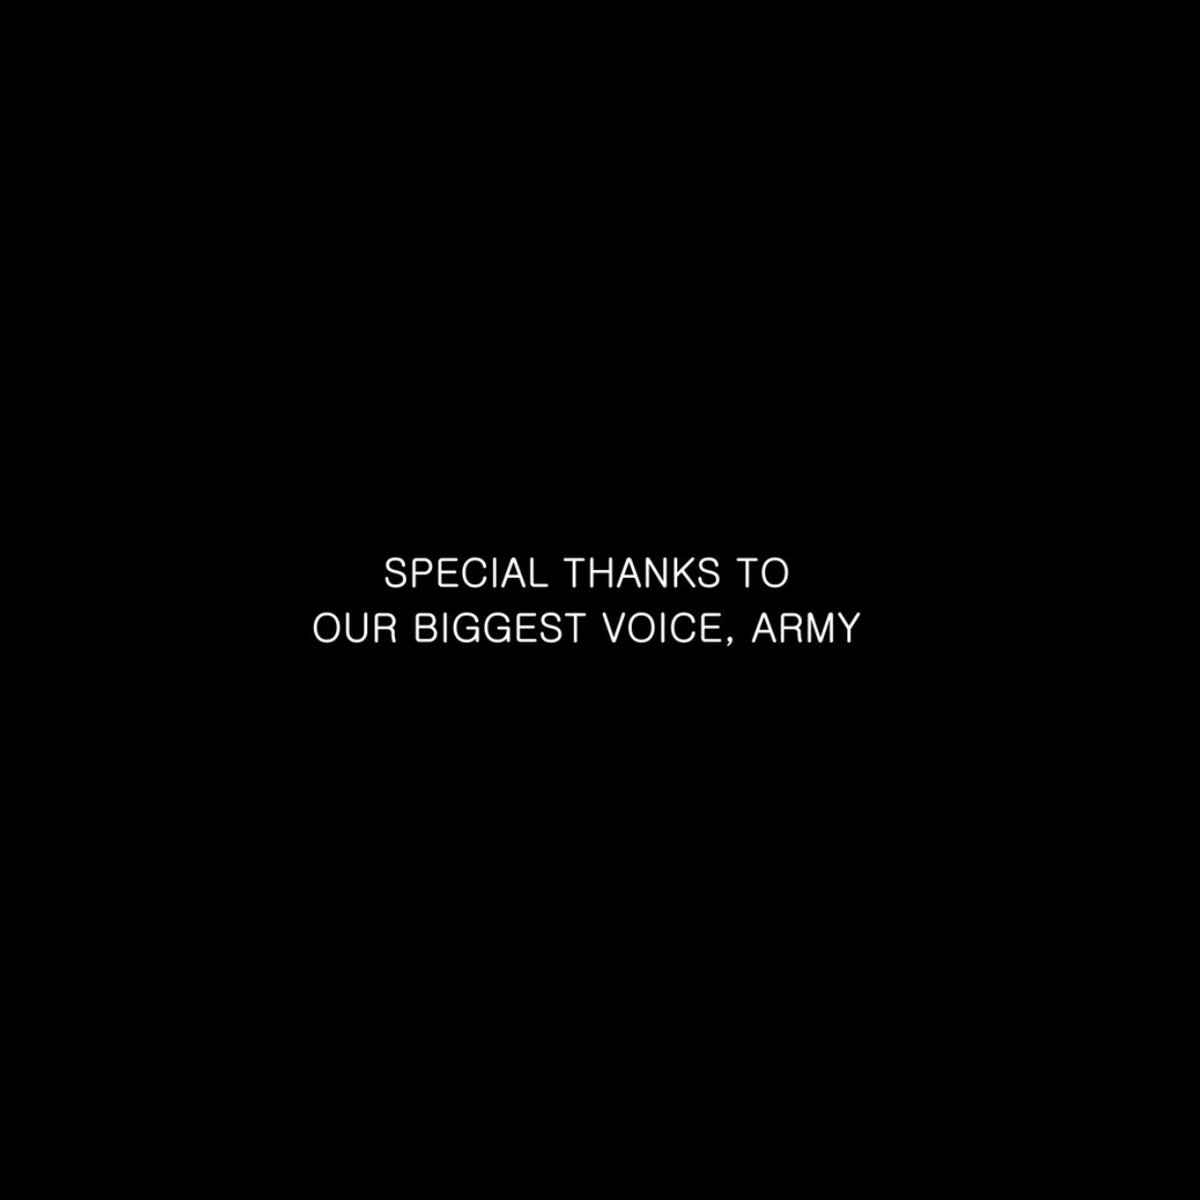 At the end of #JungKook_Seven Recording Film: “SPECIAL THANKS TO OUR BIGGEST VOICE, ARMY”